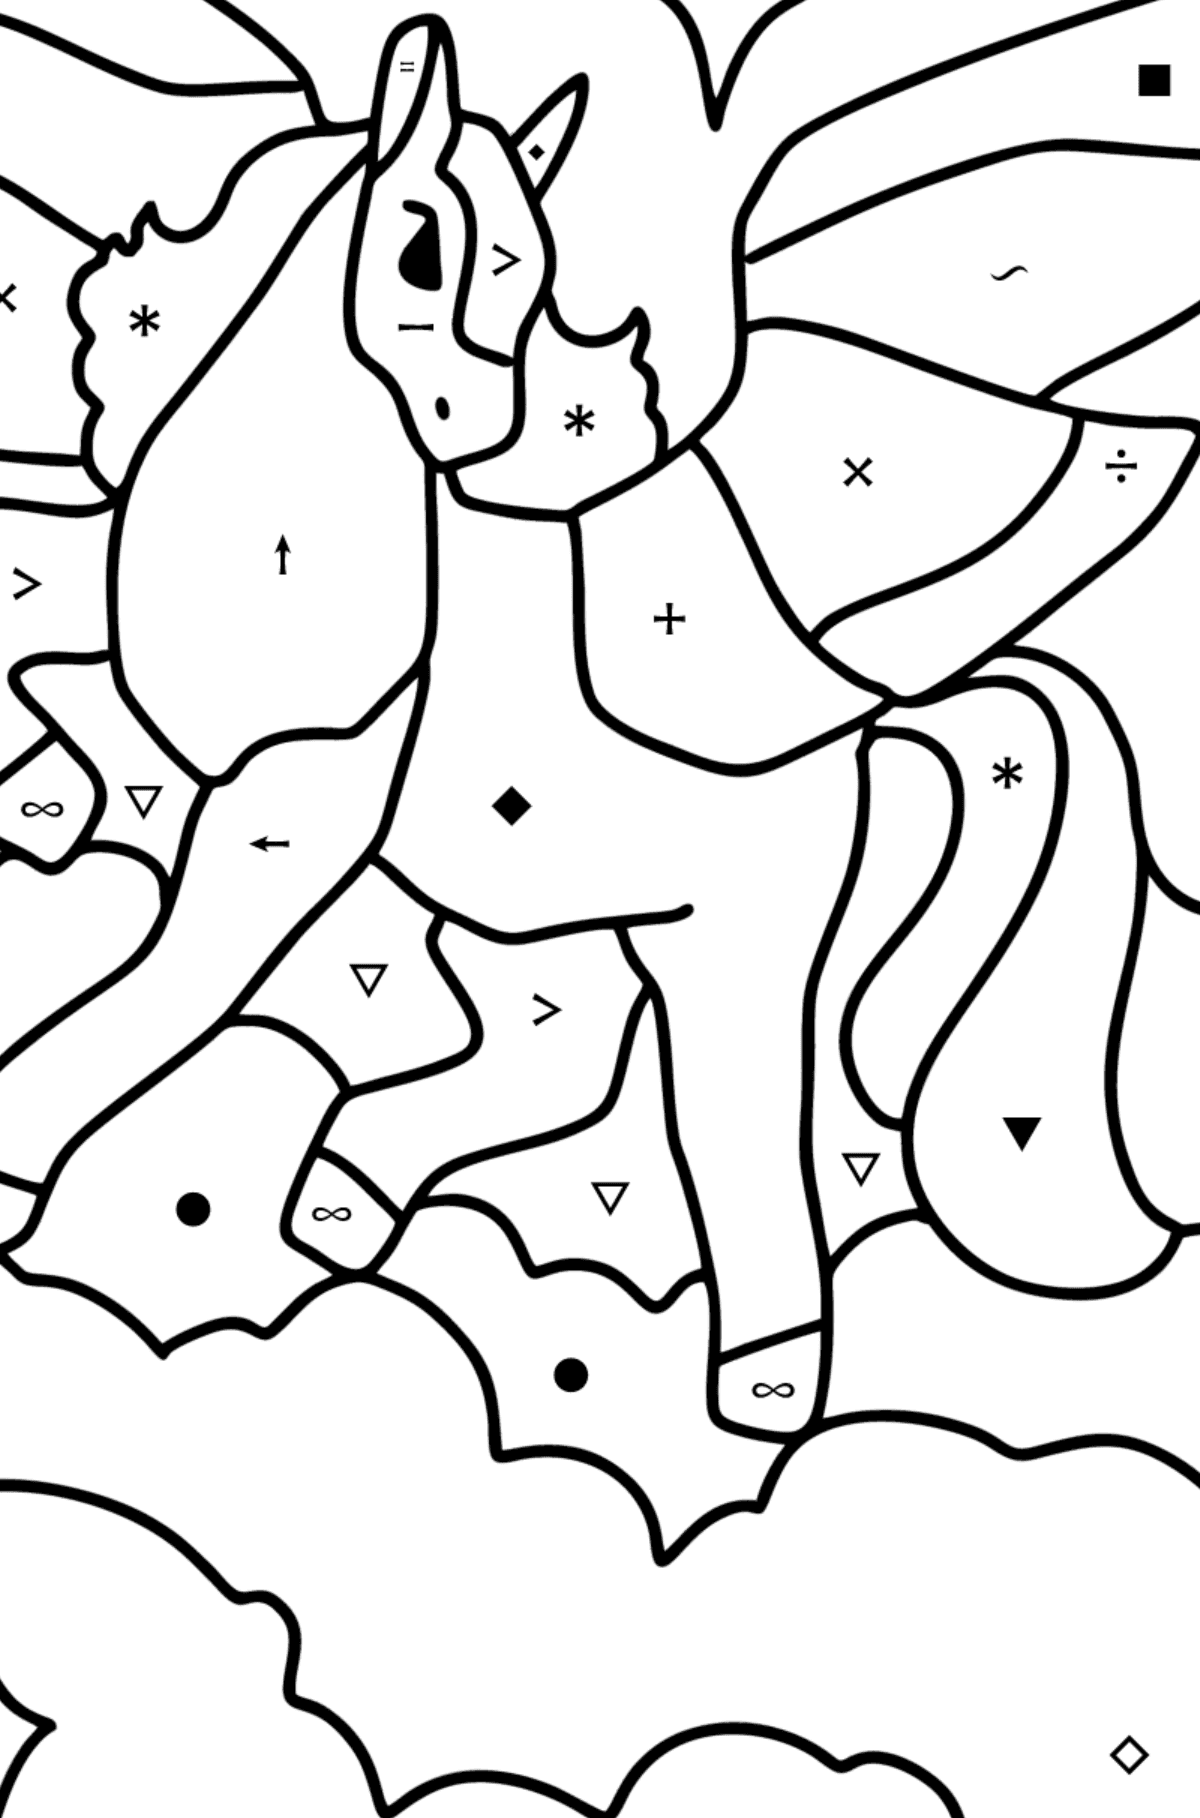 Pegasus coloring page - Coloring by Symbols for Kids